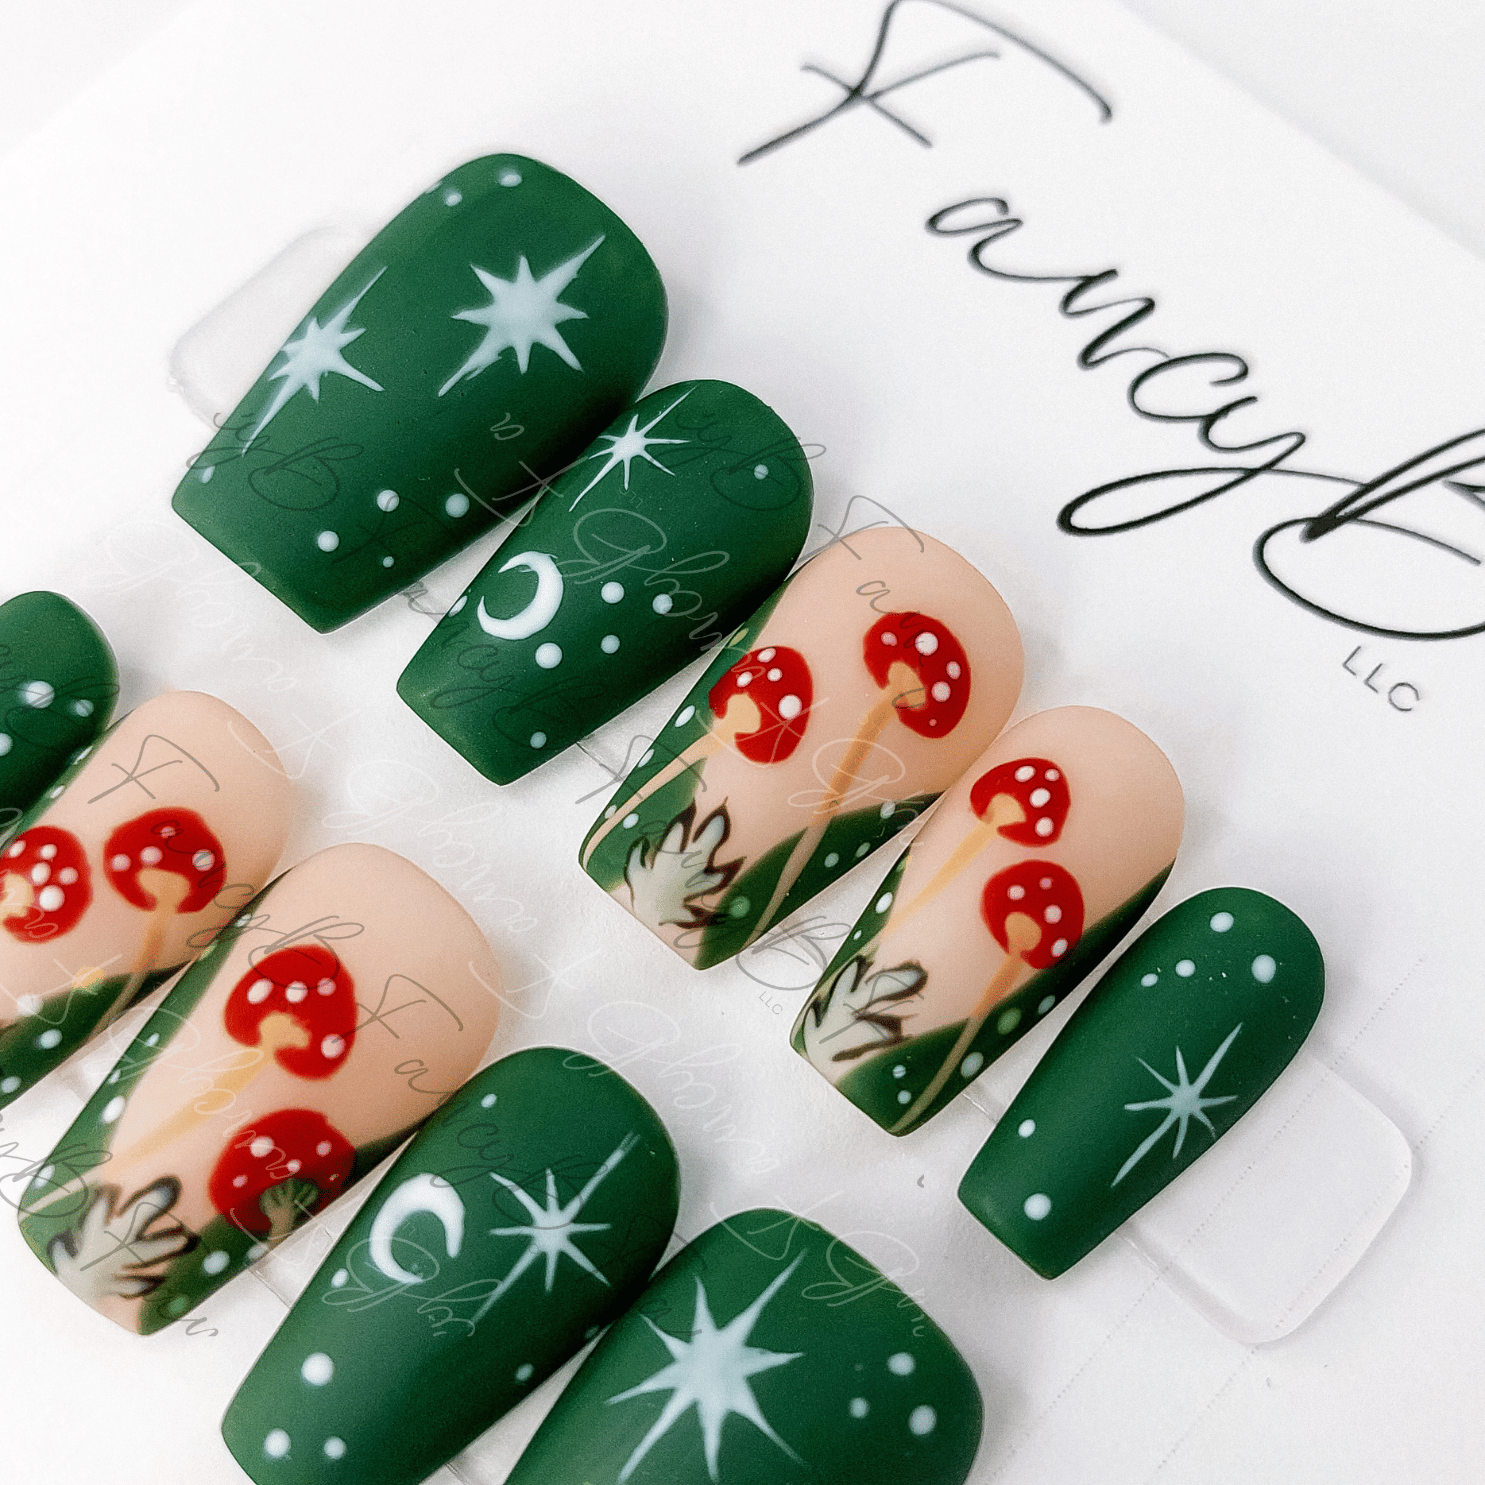 Custom press on nails mushroom leafy nails with green celestial designs. Hand painted mushroom nails in short coffin shape from FancyB Nails.